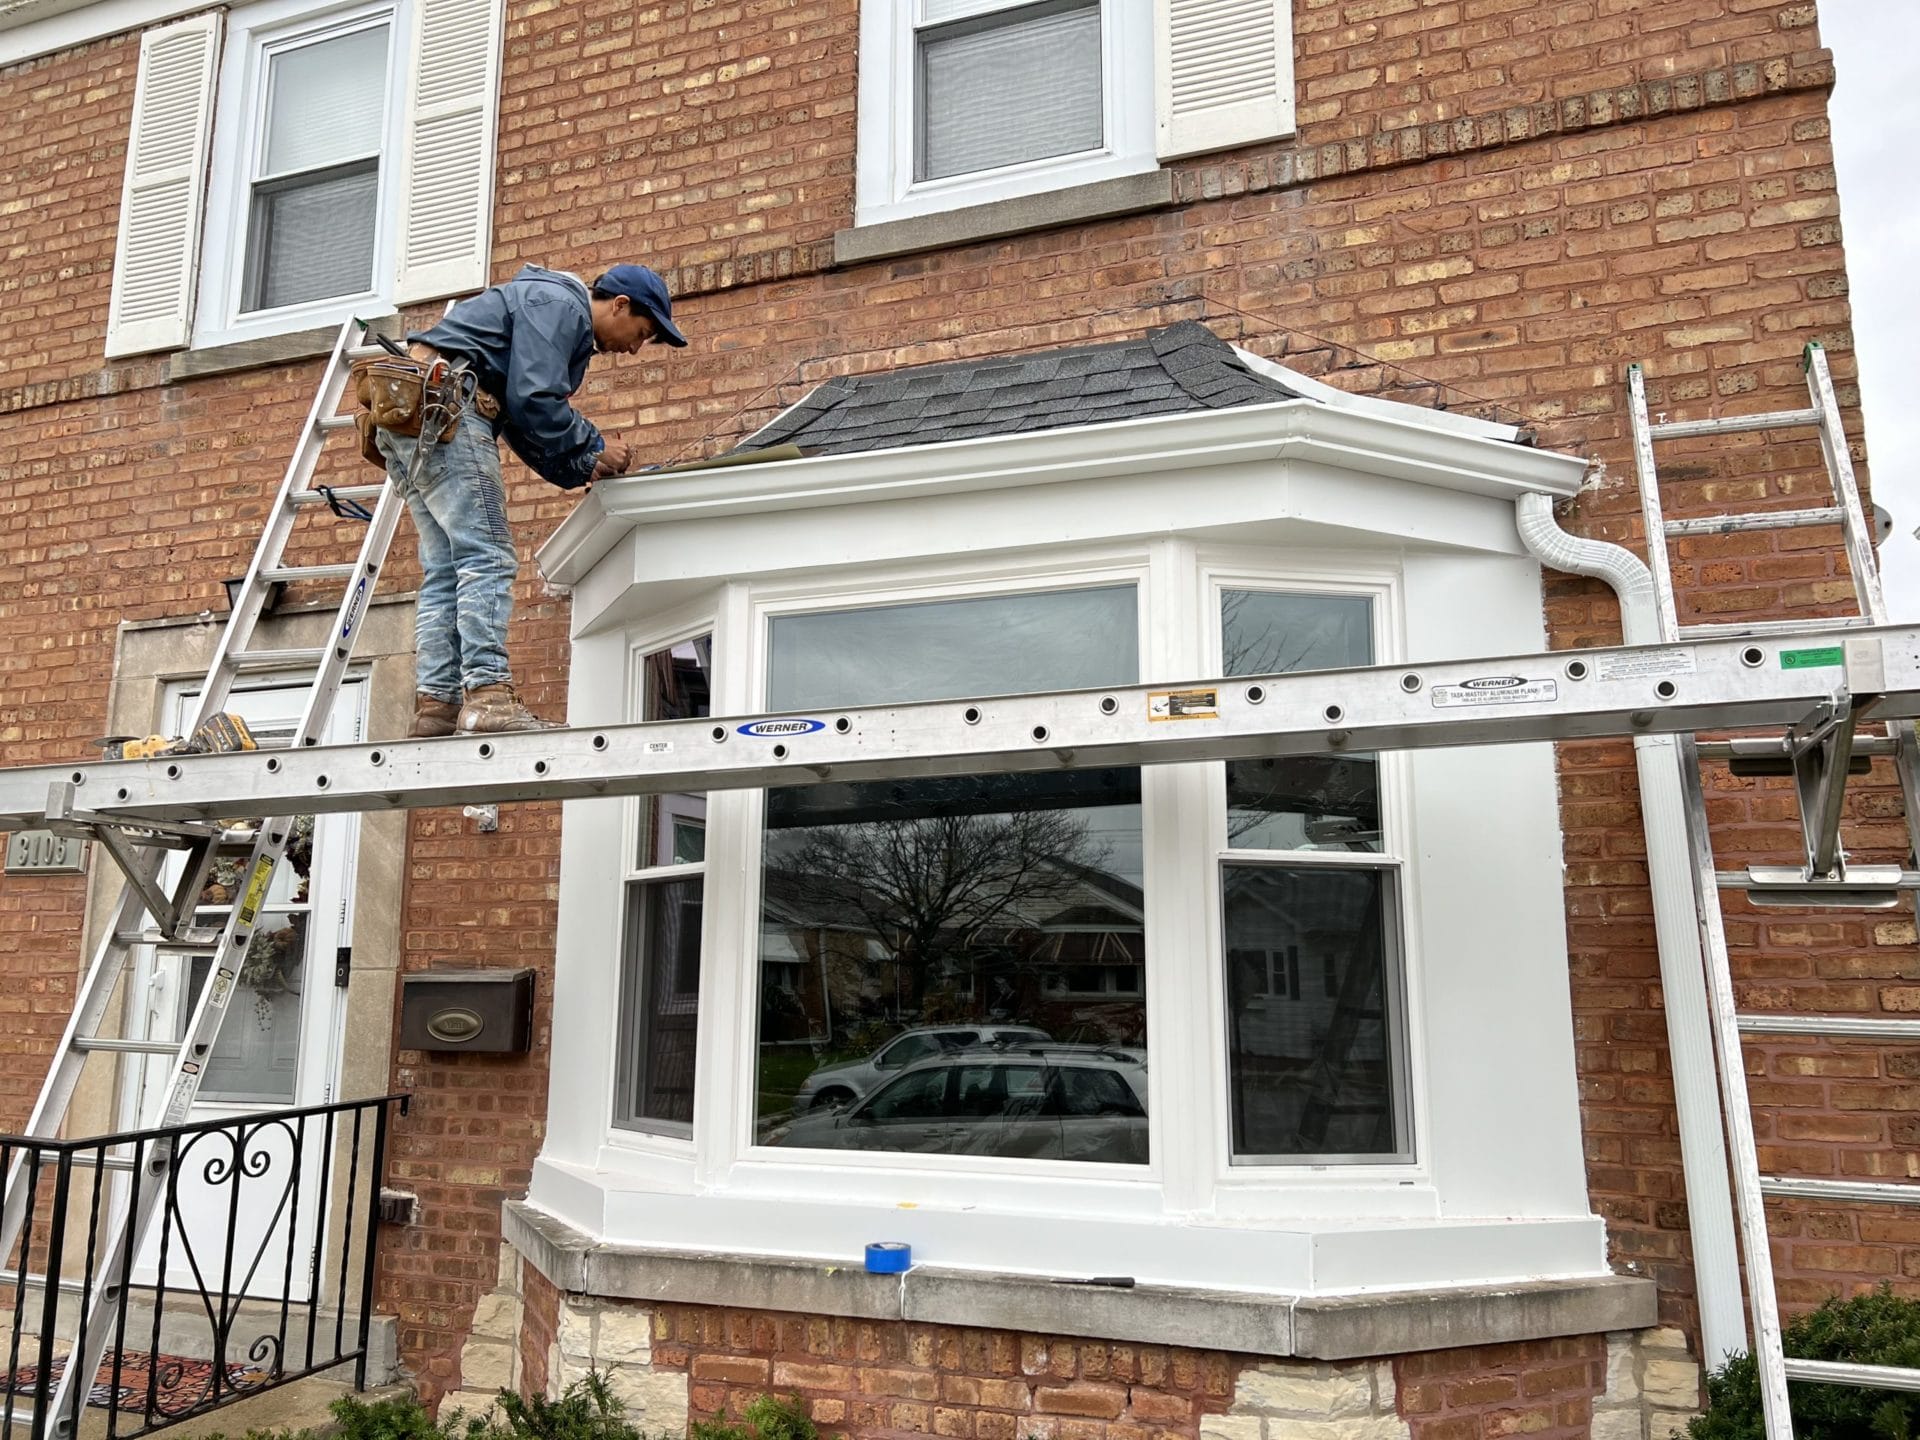 Chicago roof services, bay roof repair - bay window repair chicago illinois - bay window chicago